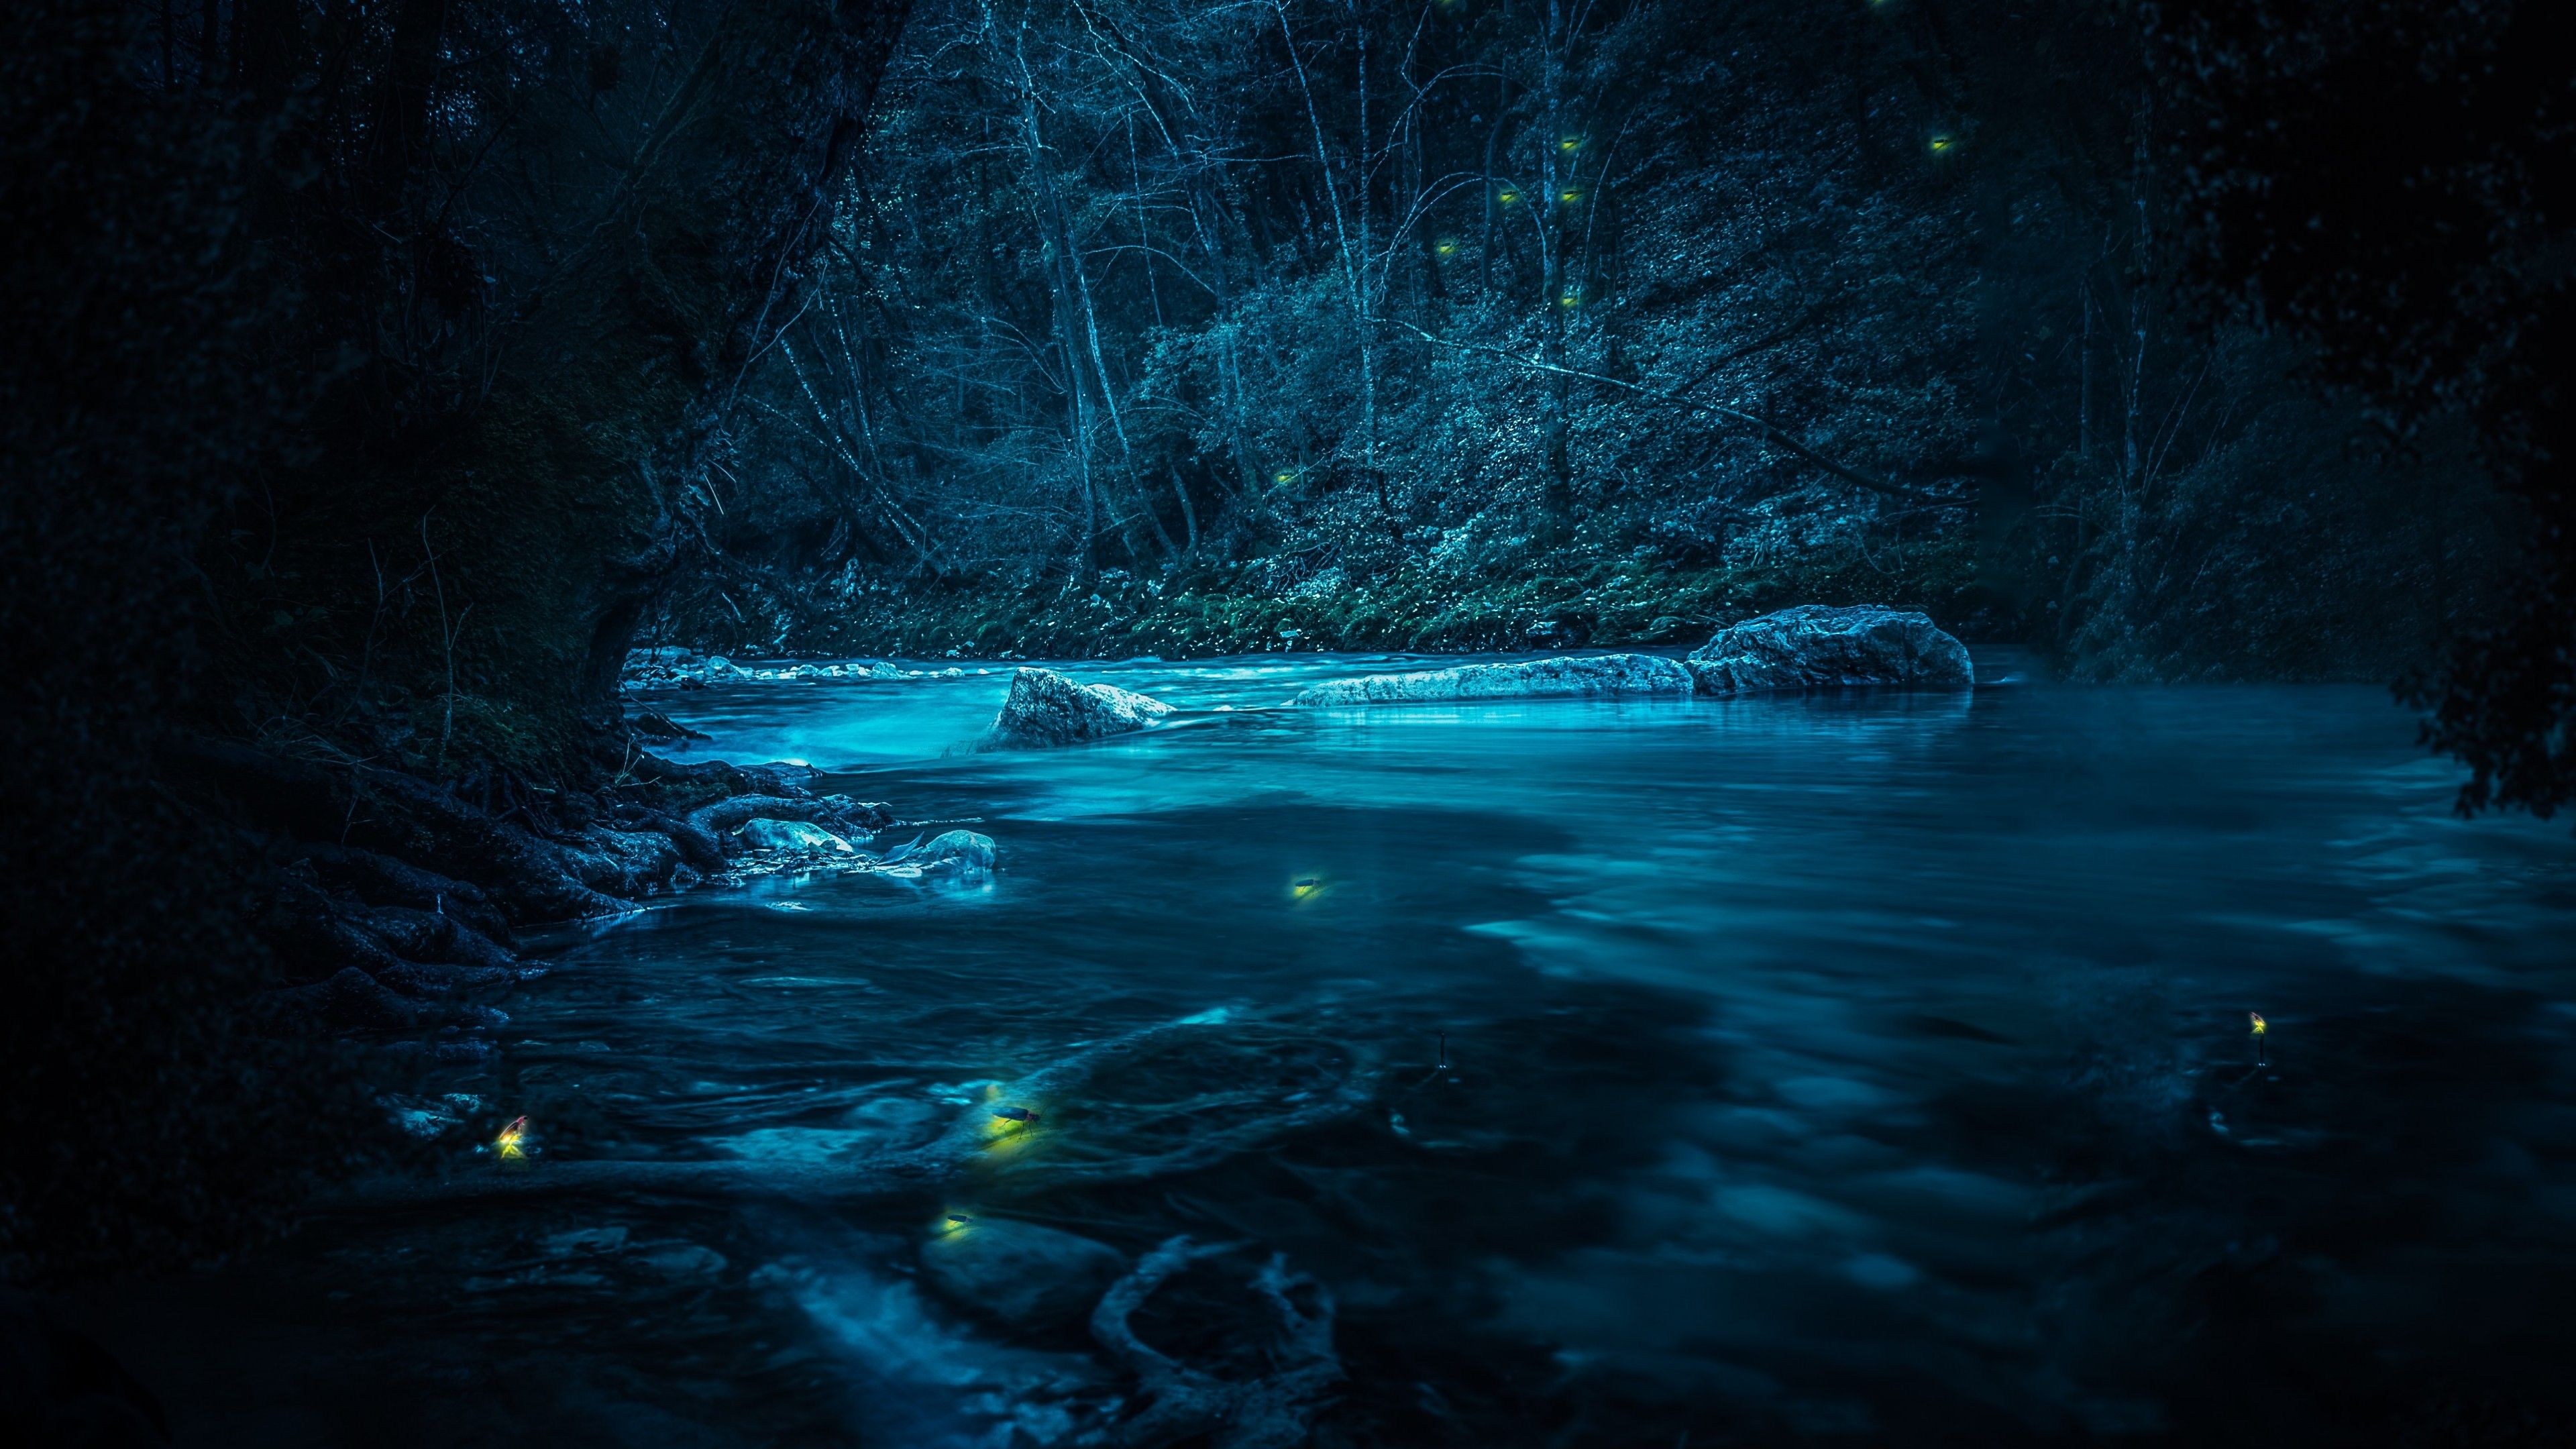 Wallpaper River, Stream, Fairies, Night, Forest, 4K, Photography,. Wallpaper for iPhone, Android, Mobile and Desktop